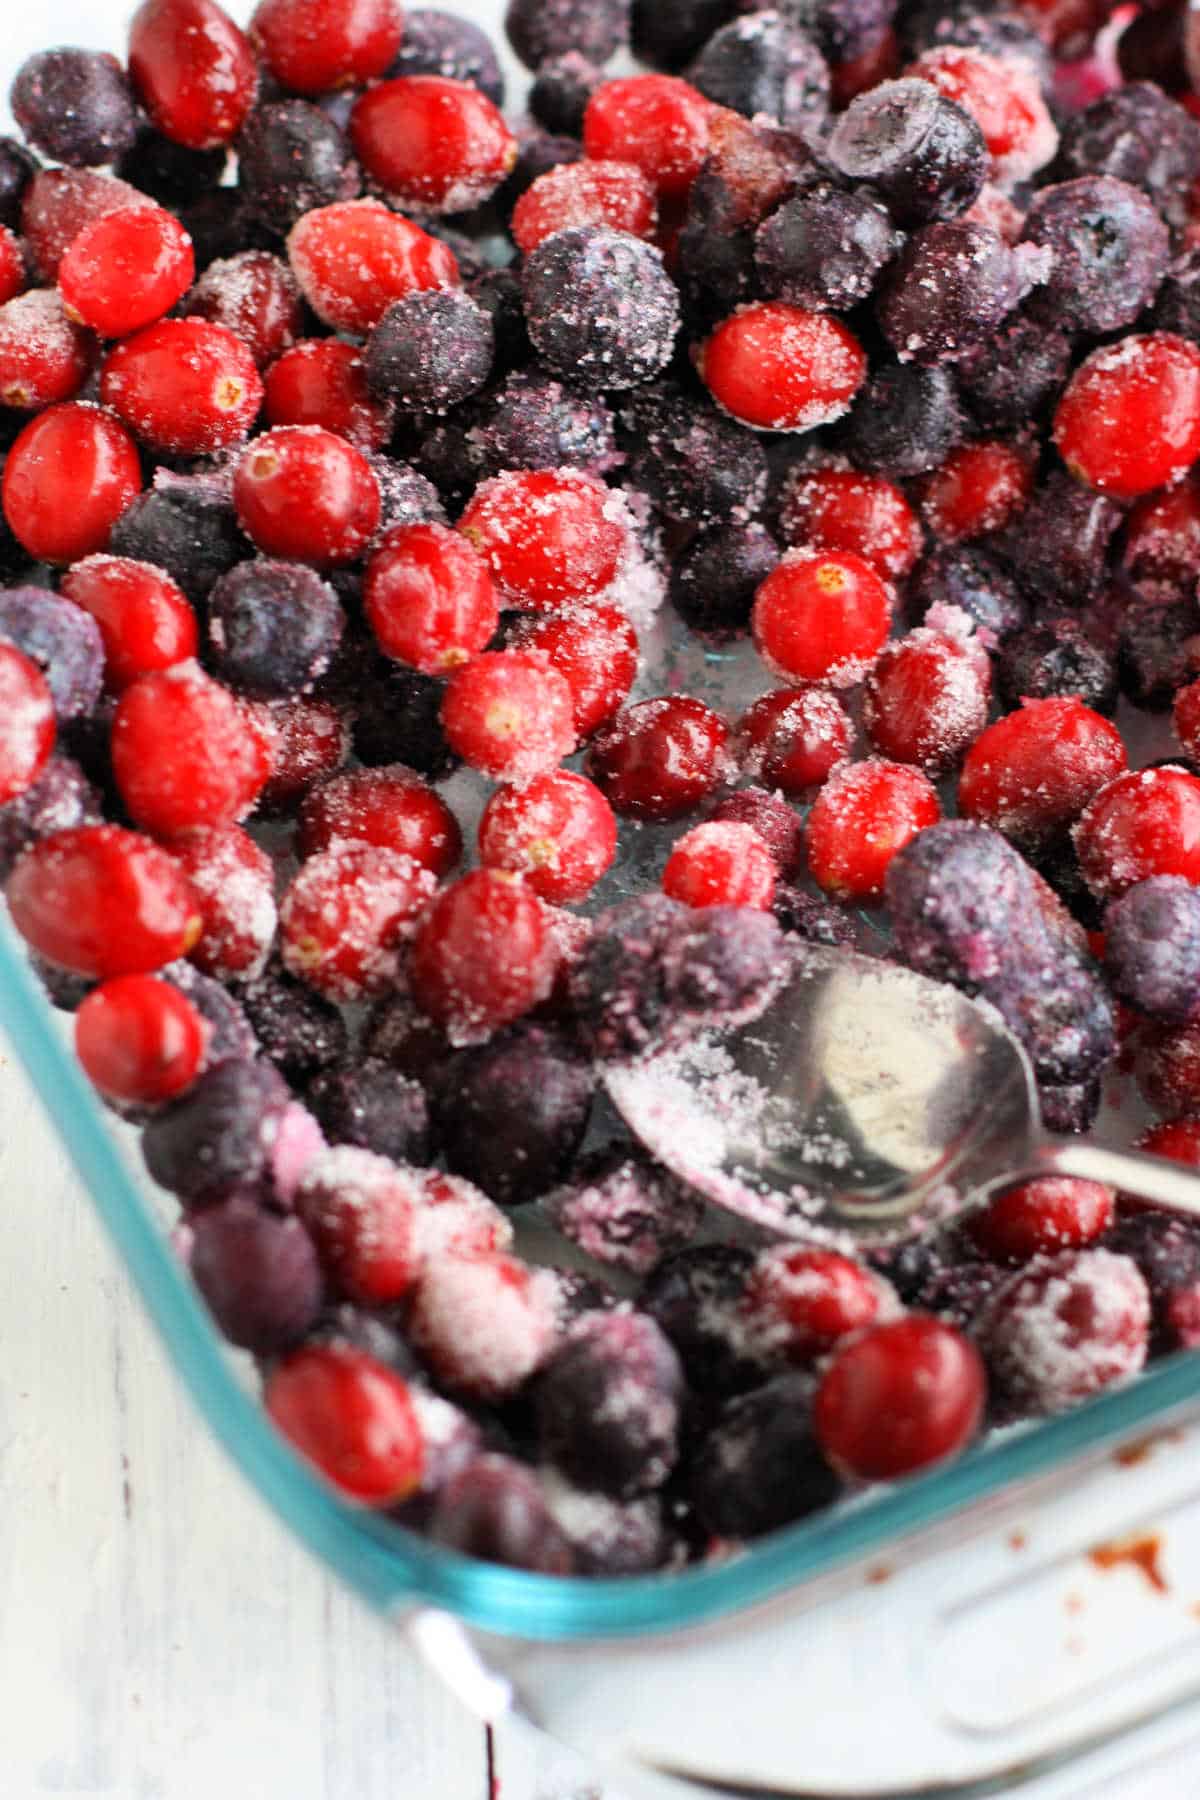 blueberries and cranberries with sugar